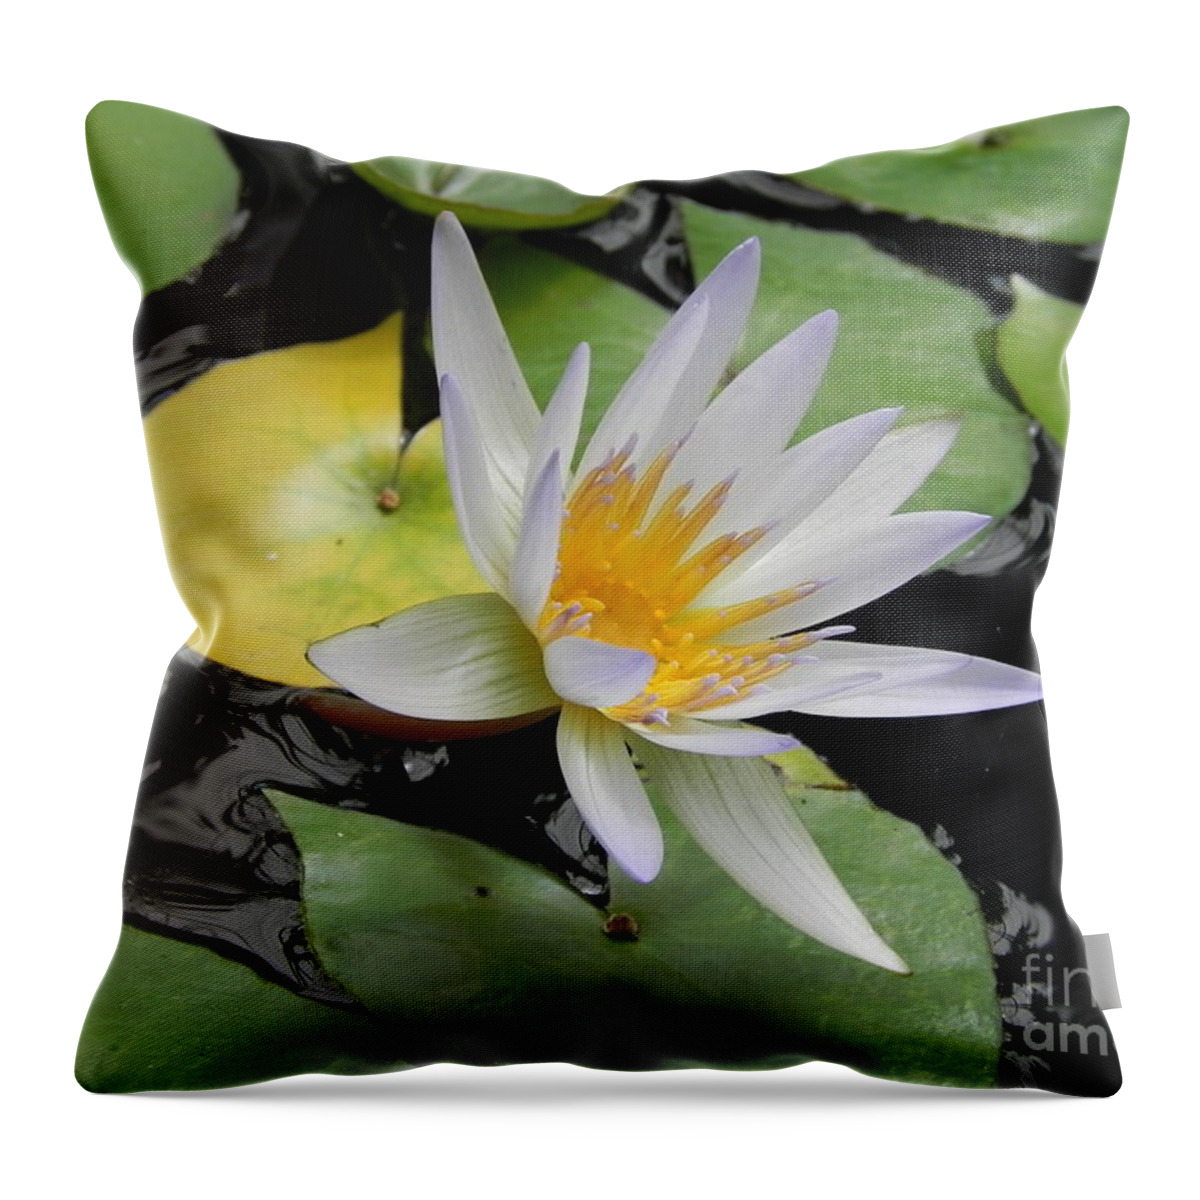 Photography Throw Pillow featuring the photograph Natures Beauty by Chrisann Ellis